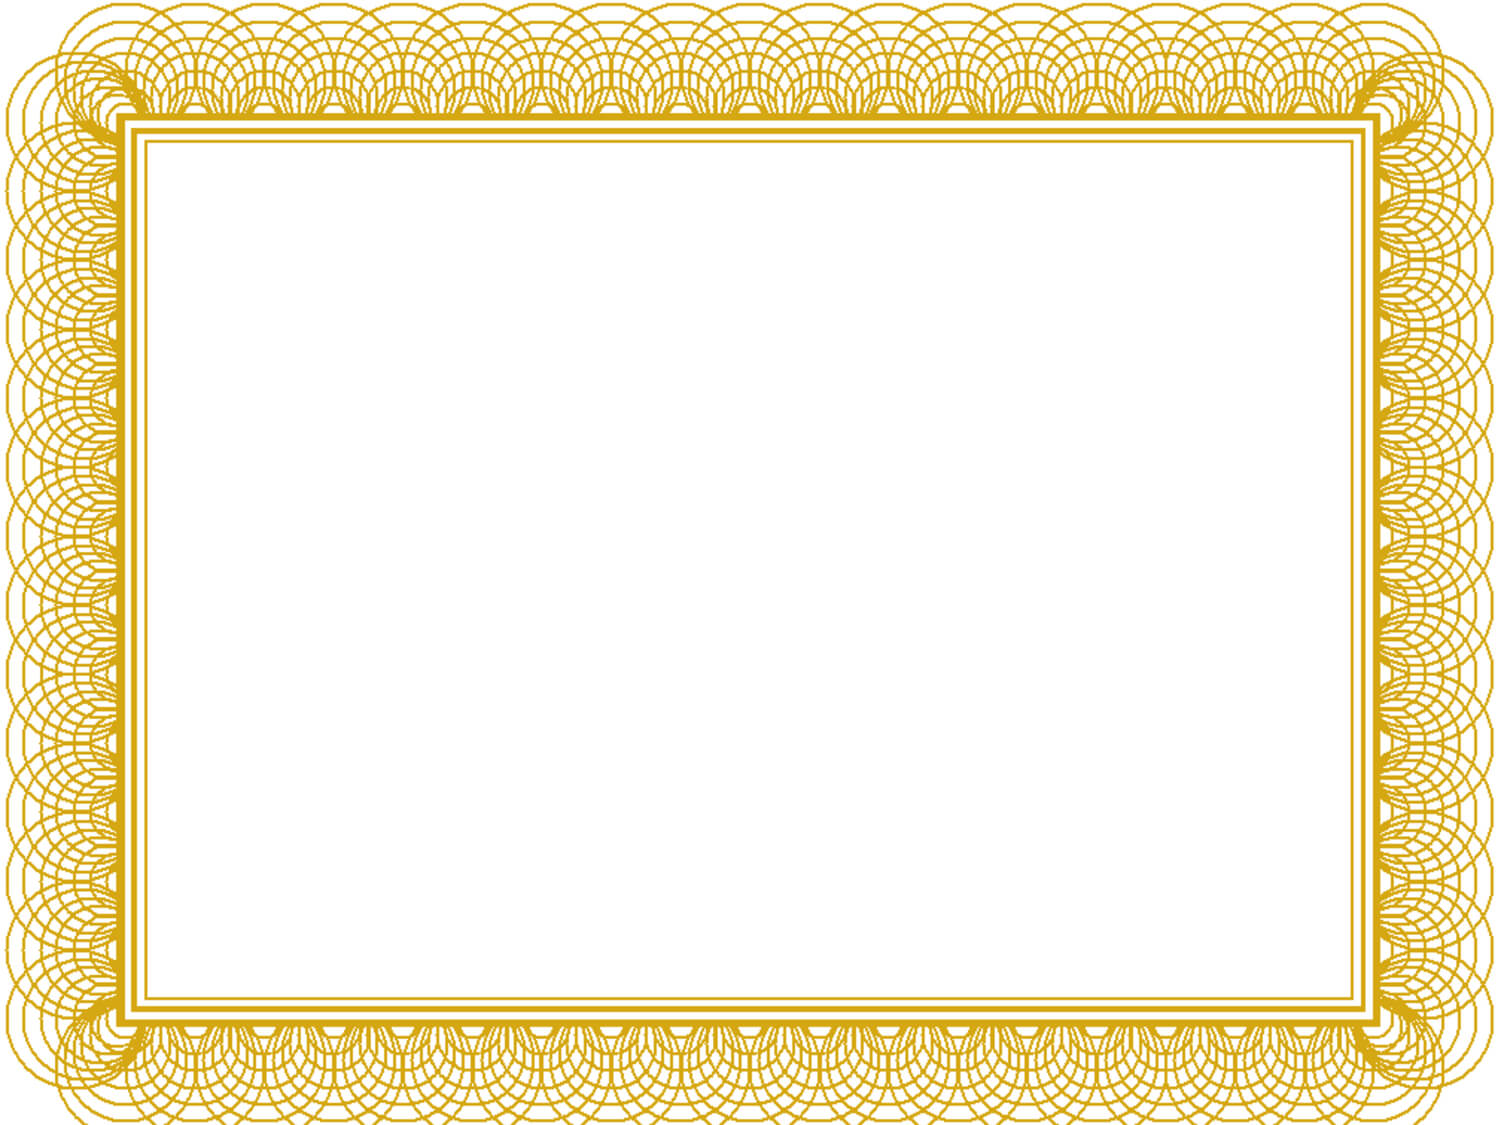 Award Certificate Border Png 2 » Png Image With Regard To Award Certificate Border Template